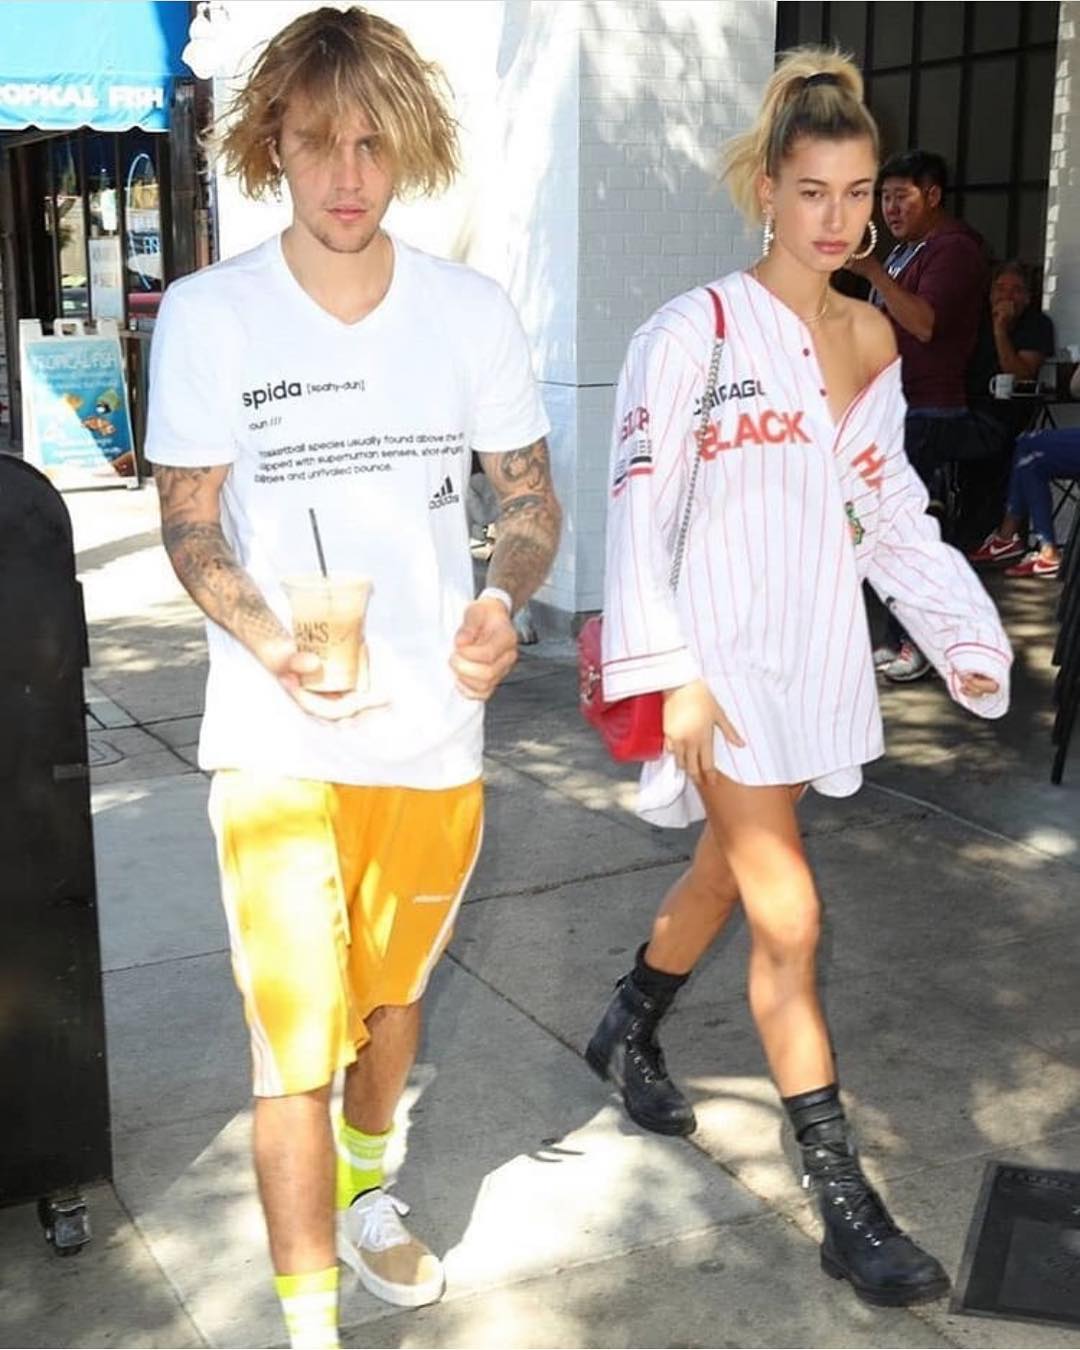 SPOTTED: Justin Bieber and Hailey Baldwin Sport adidas, FEAR OF